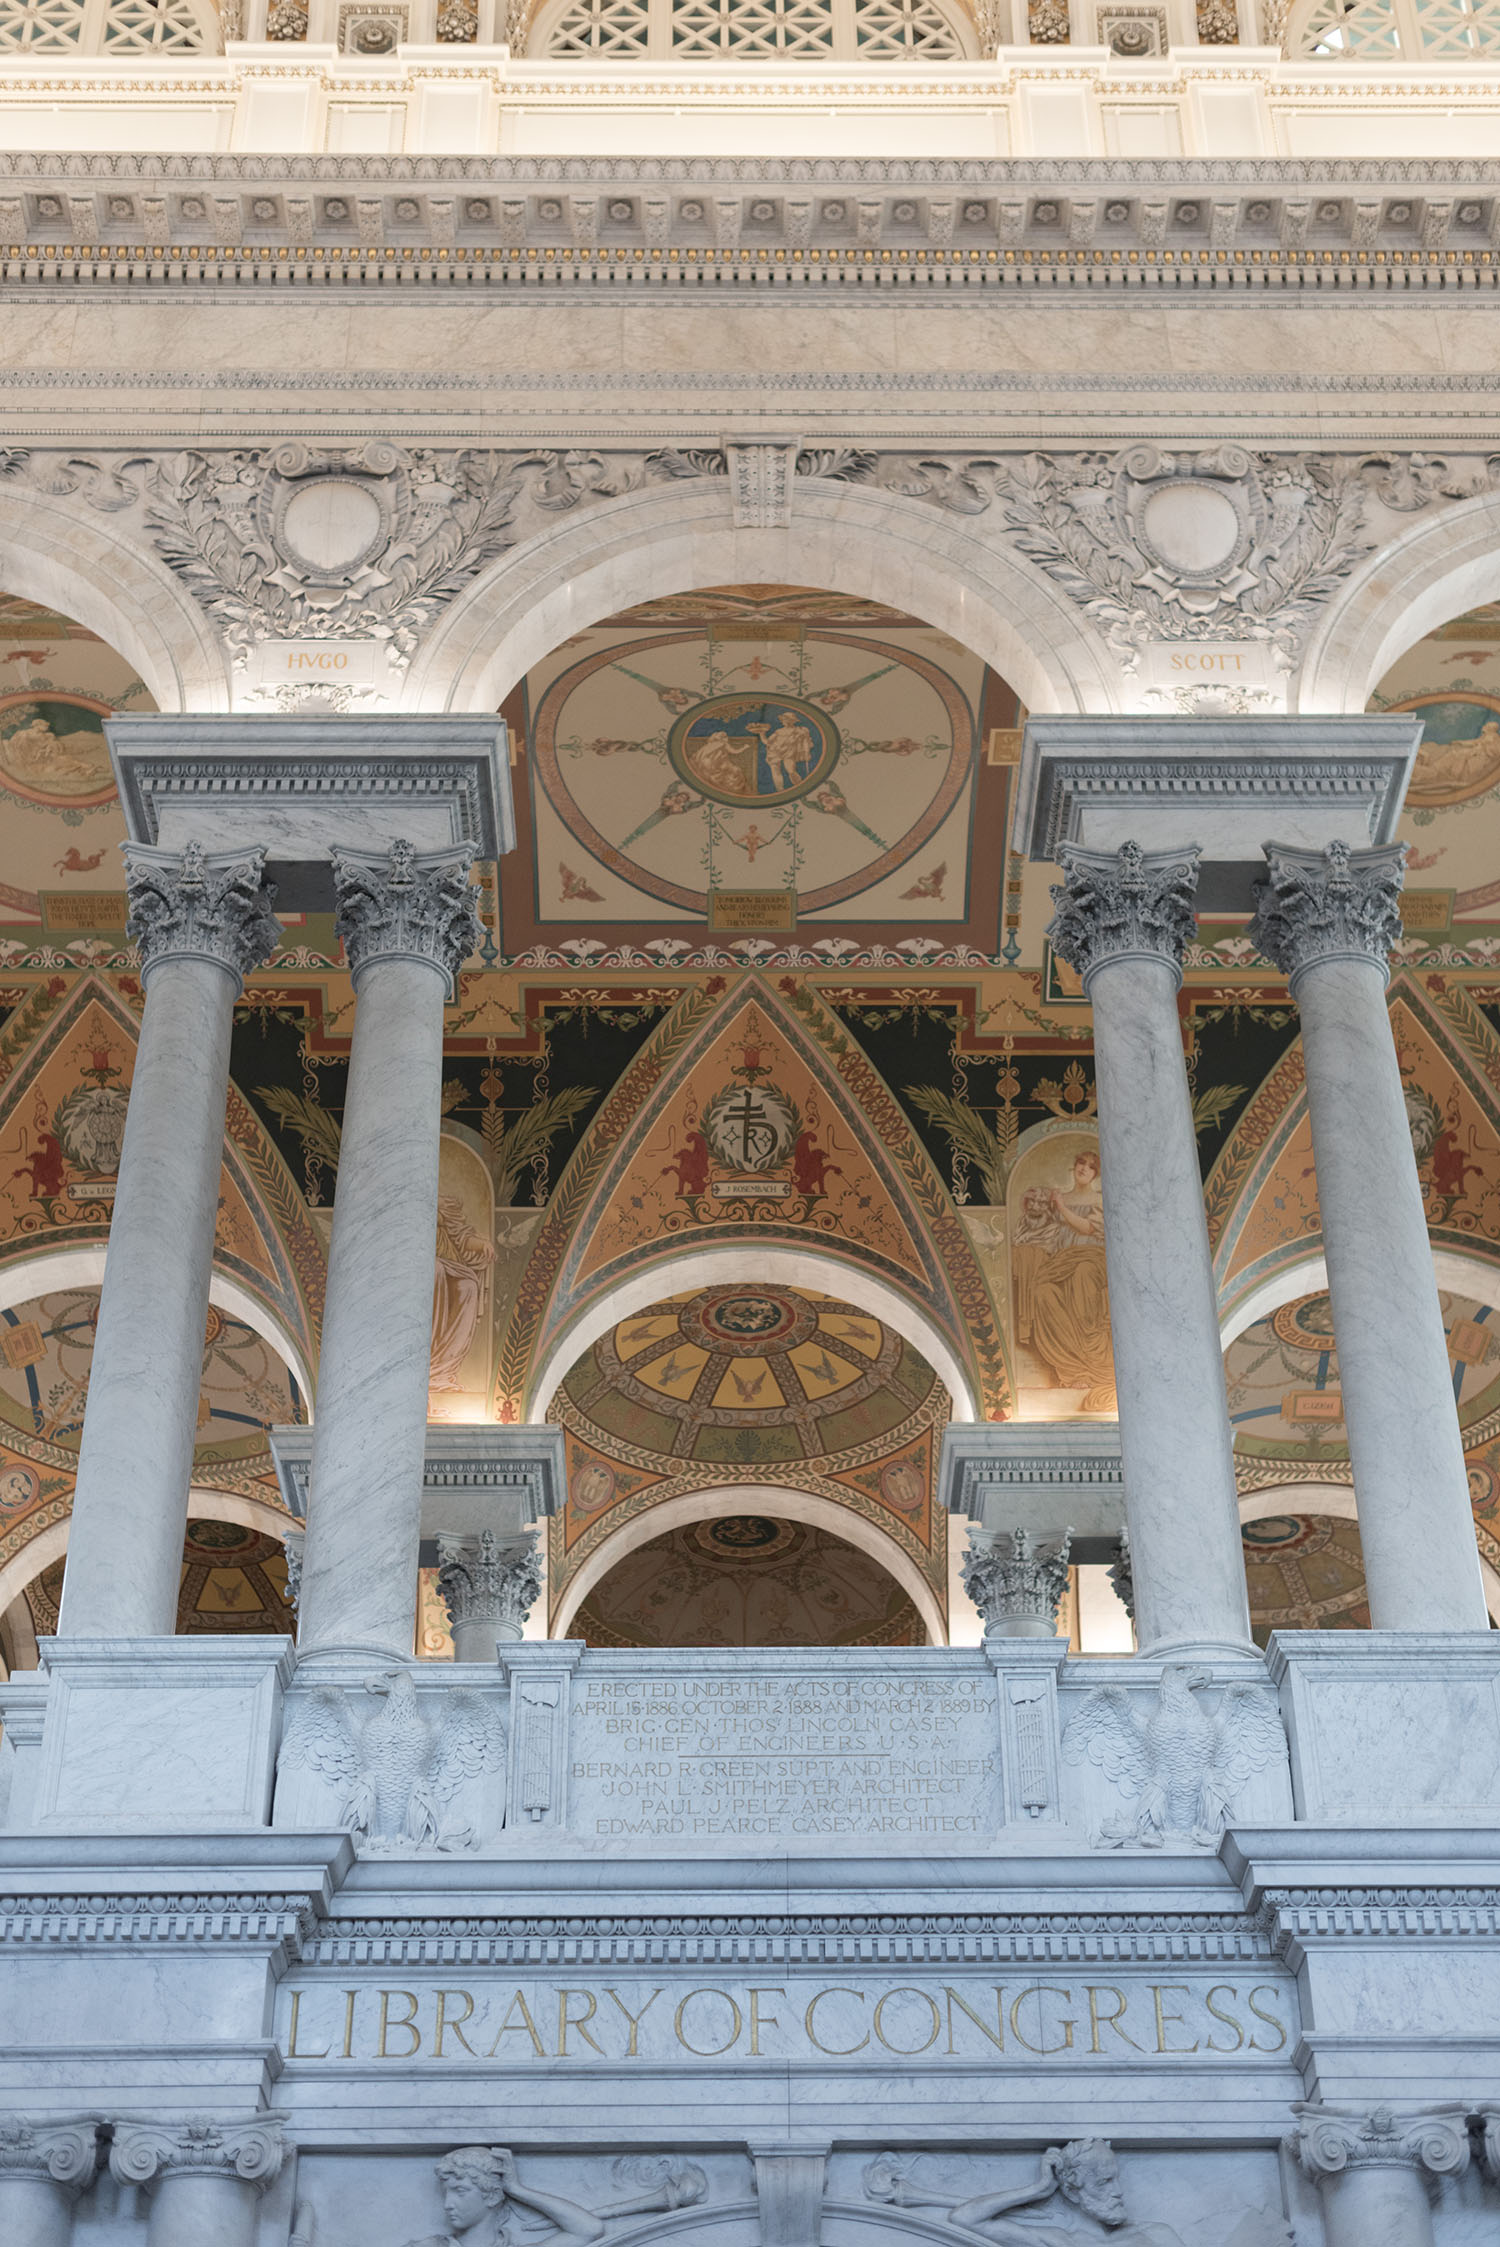 Vaulted ceilings in the Library of Congress in Washington DC, as photographed by top travel blogger Cee Fardoe of Coco & Vera